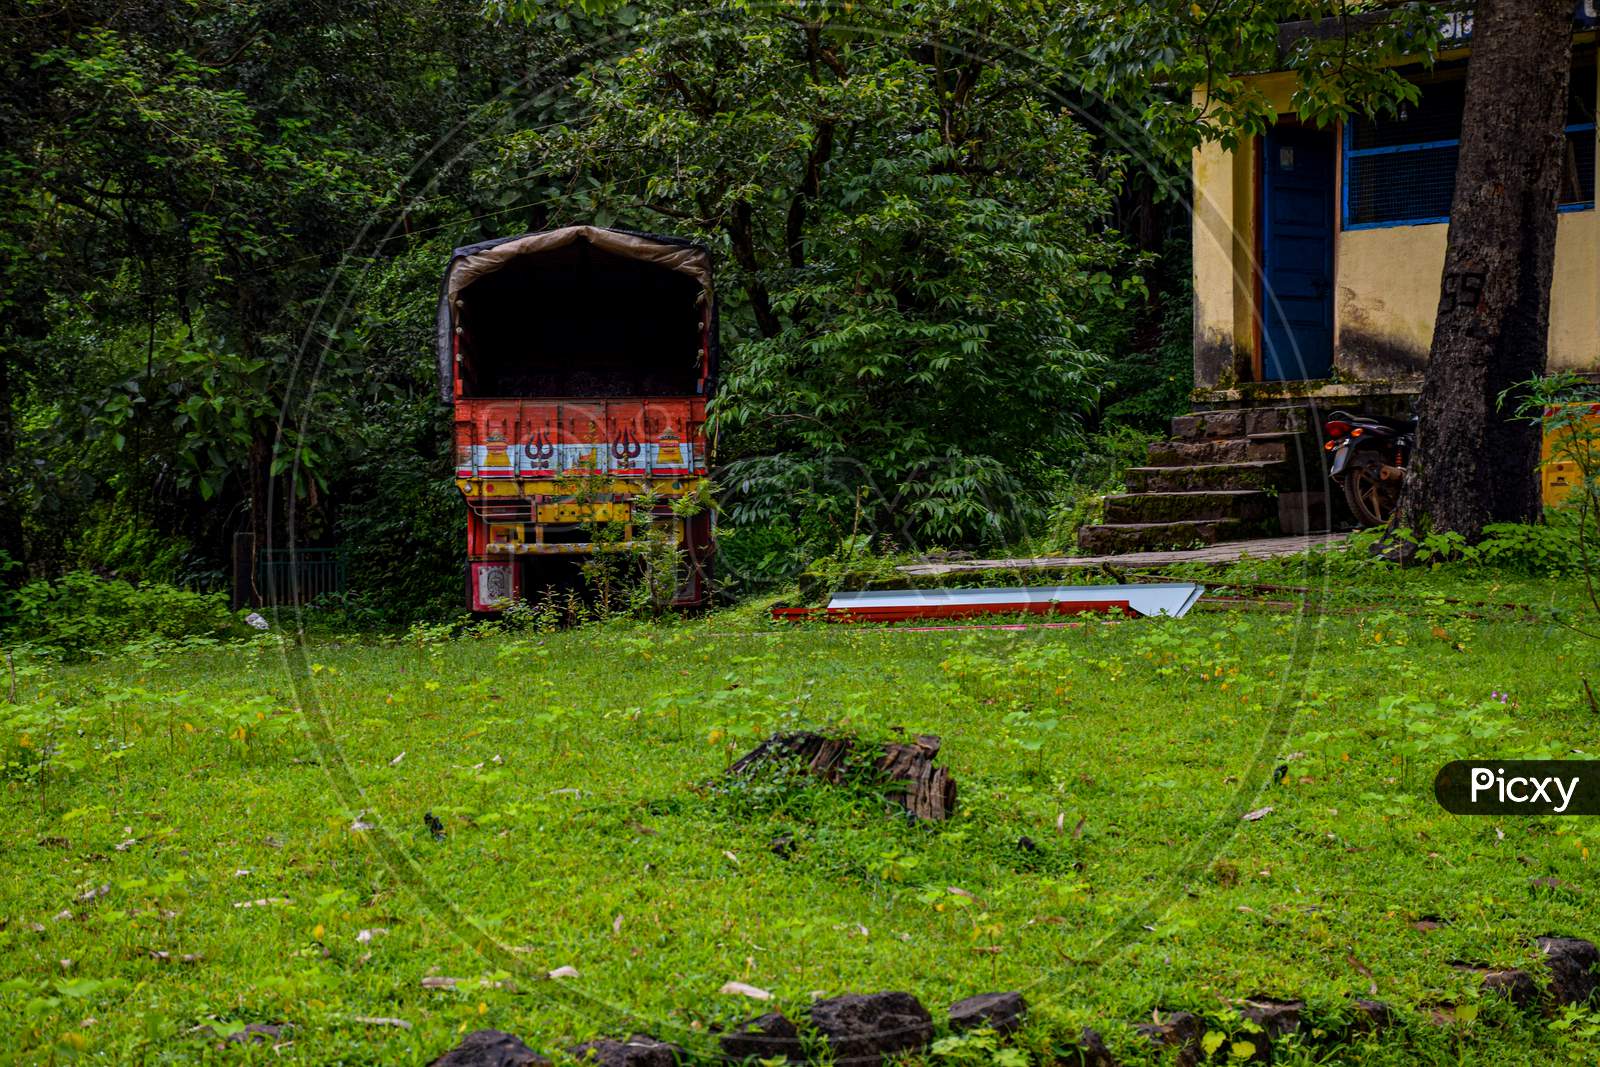 Picture Of A Truck Parked In A Dense Green Forest In India.